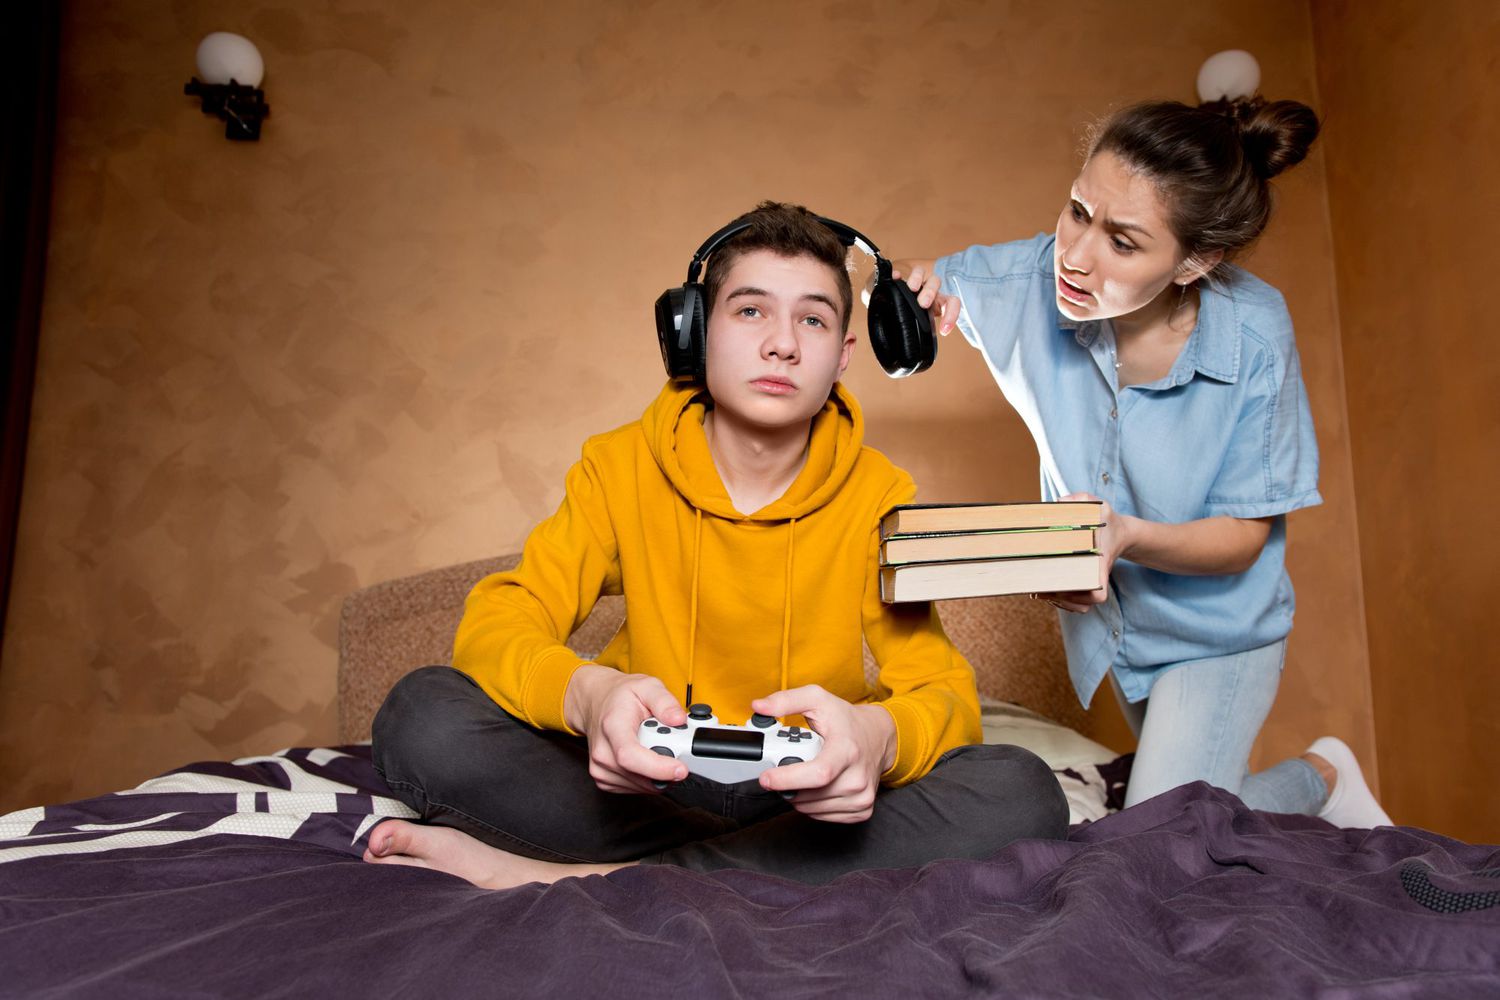 Mom scolds her brother, who is passionate about computer games and not listening